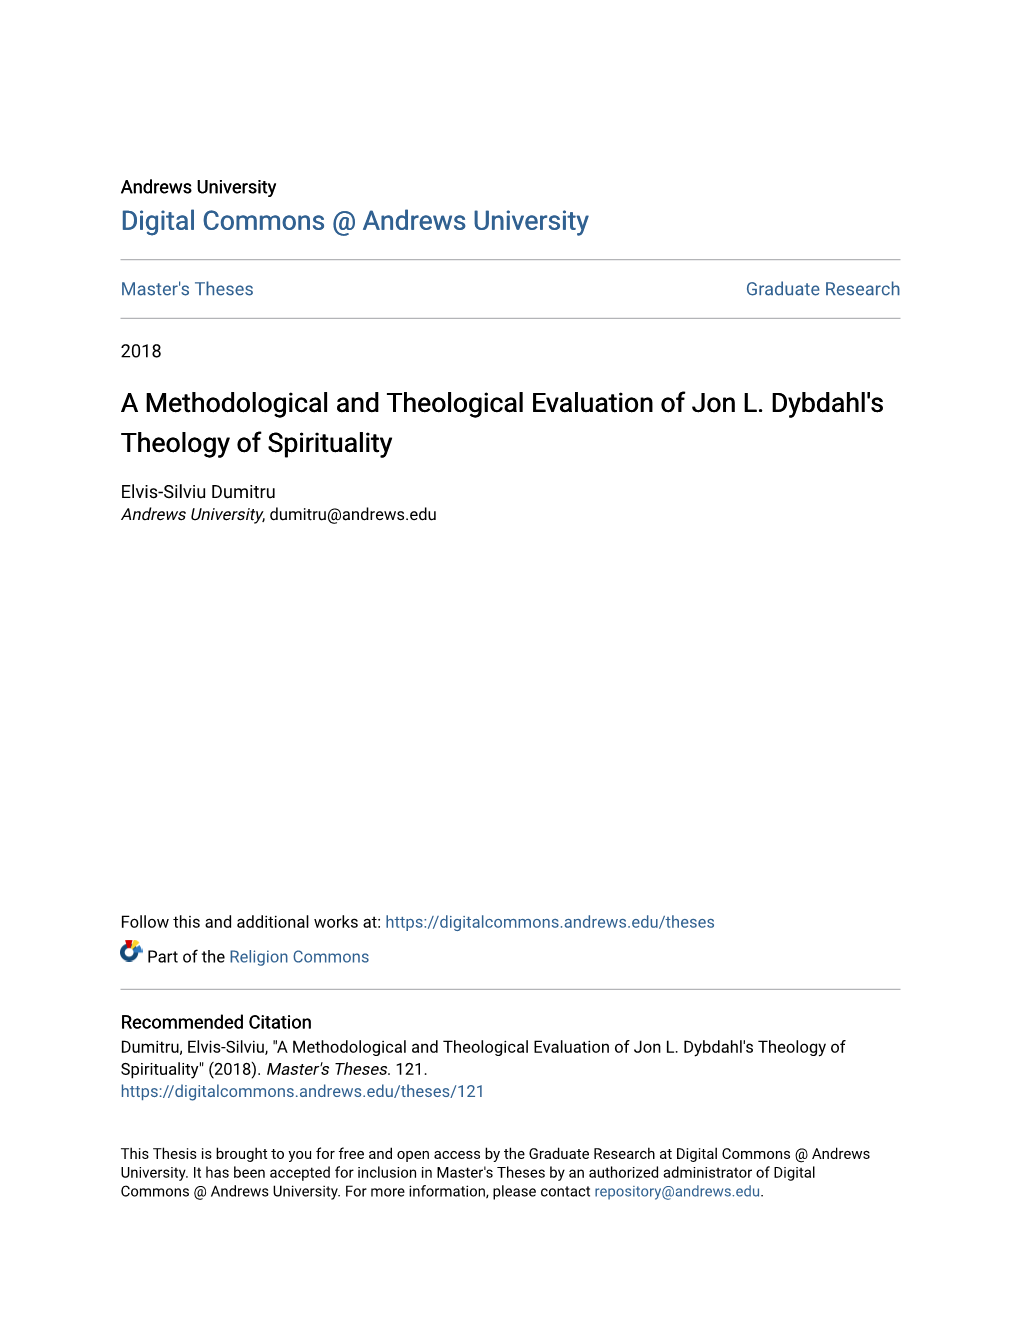 A Methodological and Theological Evaluation of Jon L. Dybdahl's Theology of Spirituality